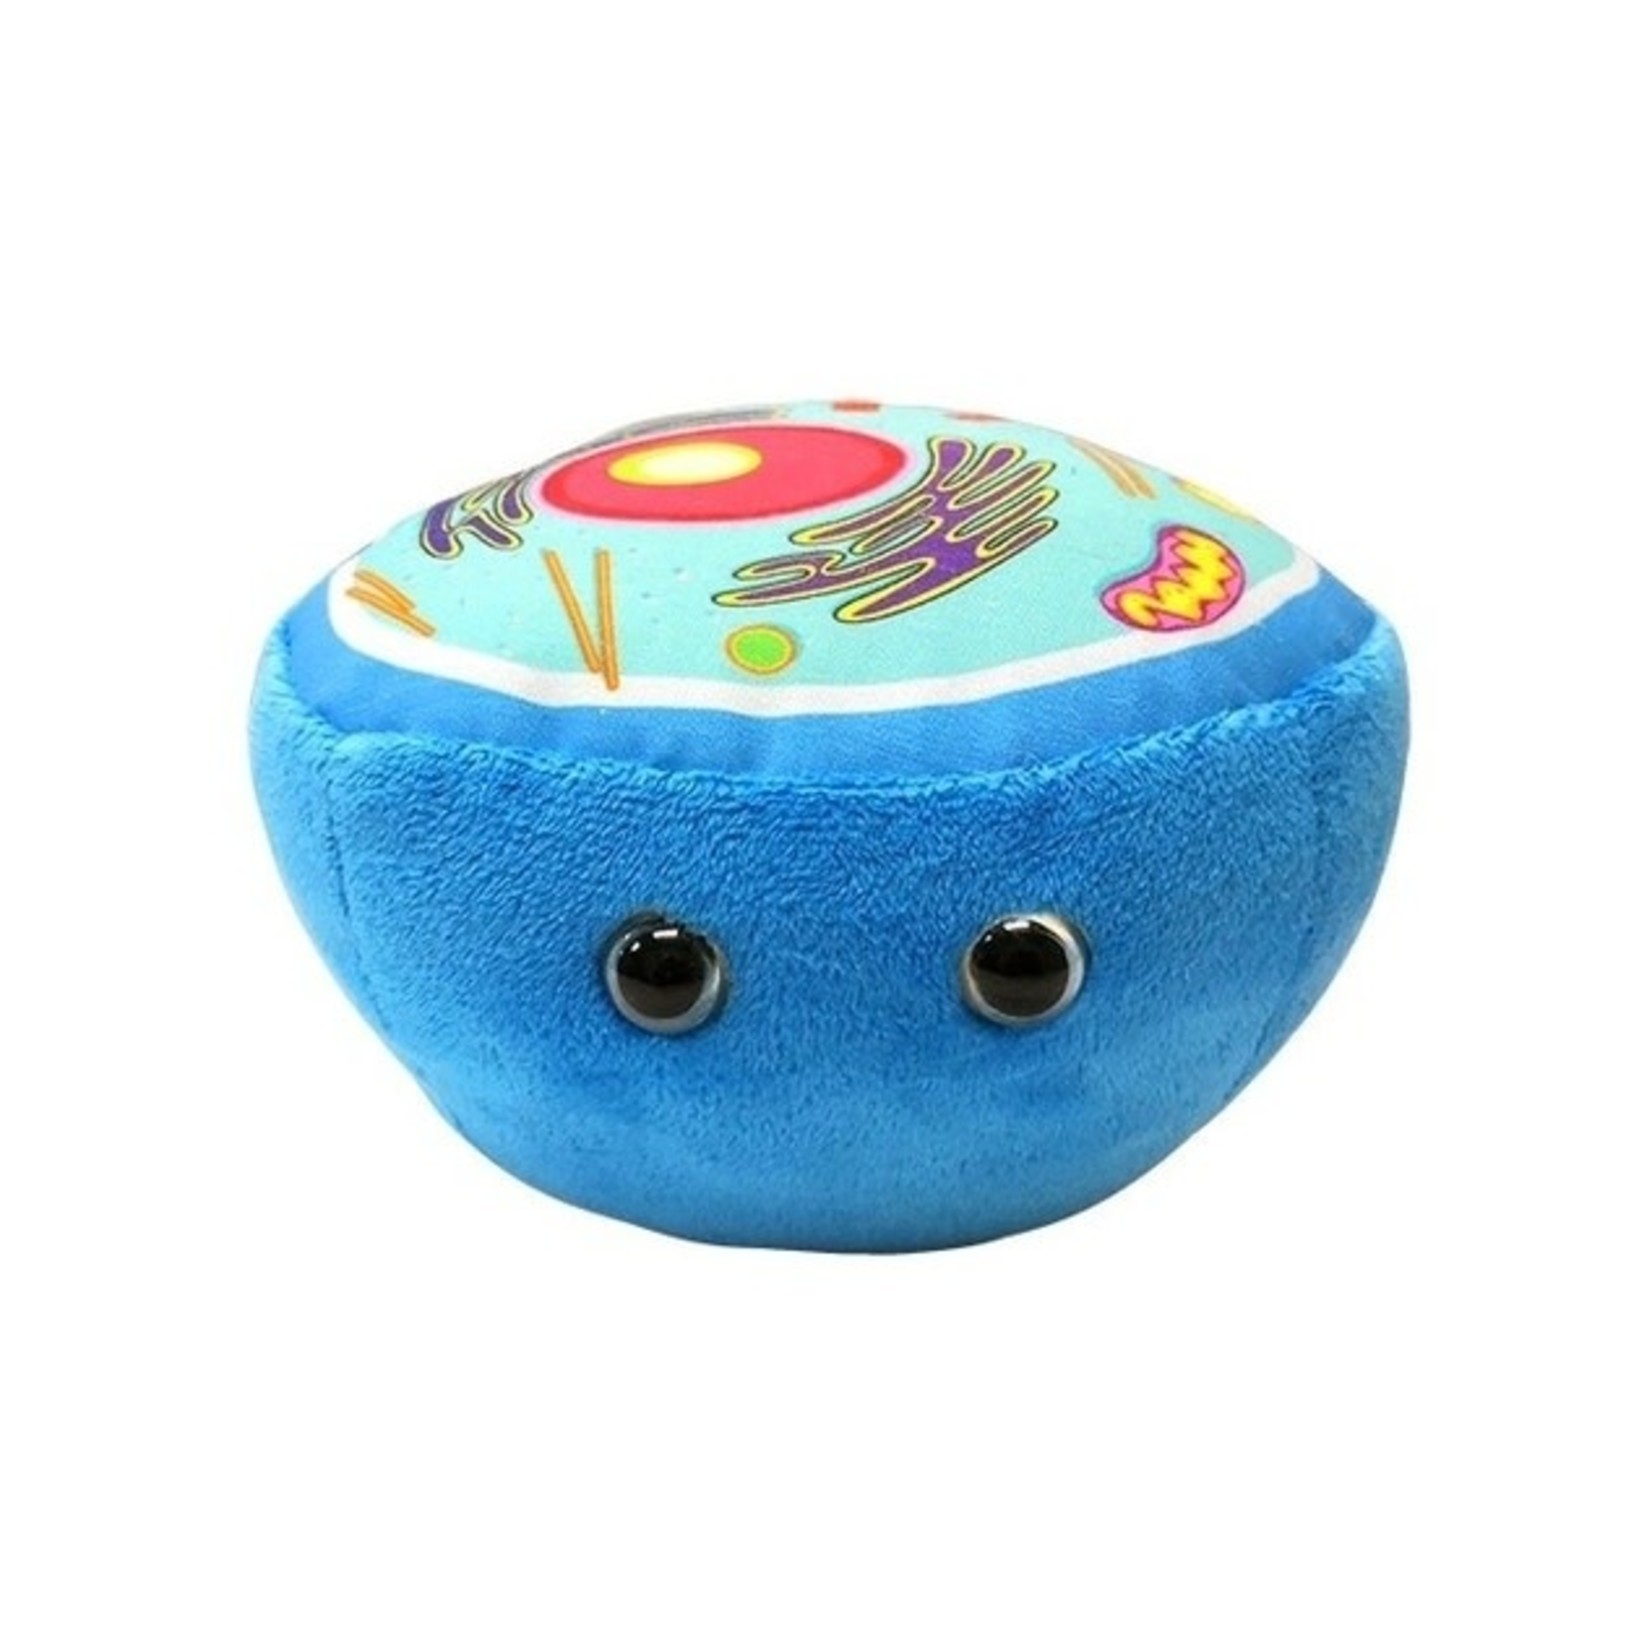 Science and Technology Plush Animal Cell